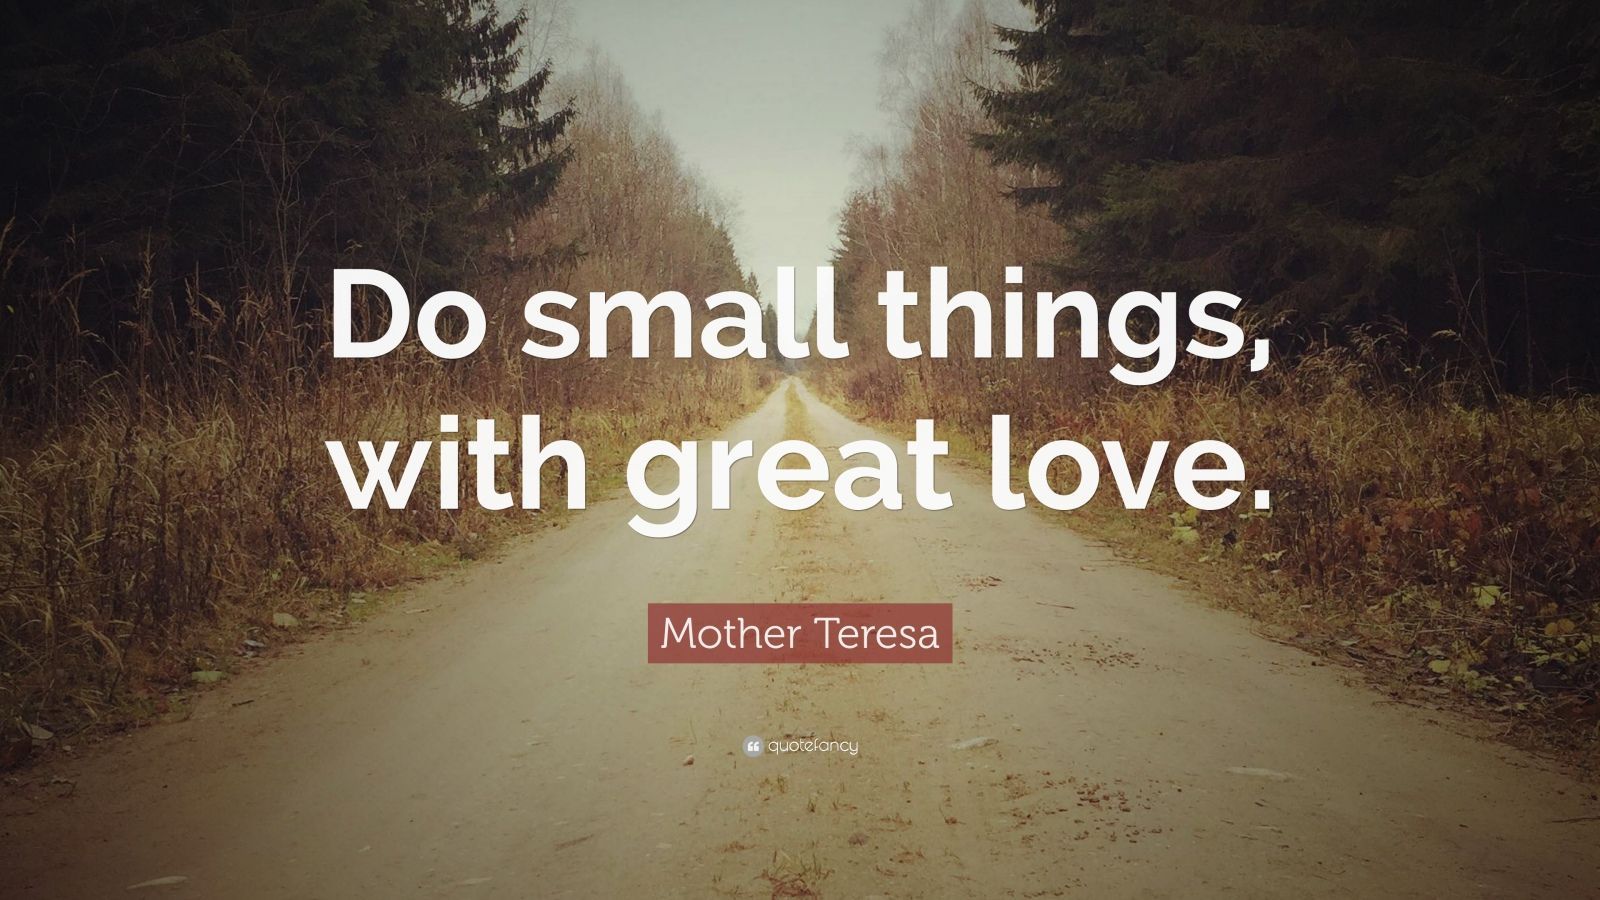 Mother Teresa Quote: “Do small things, with great love.” 12